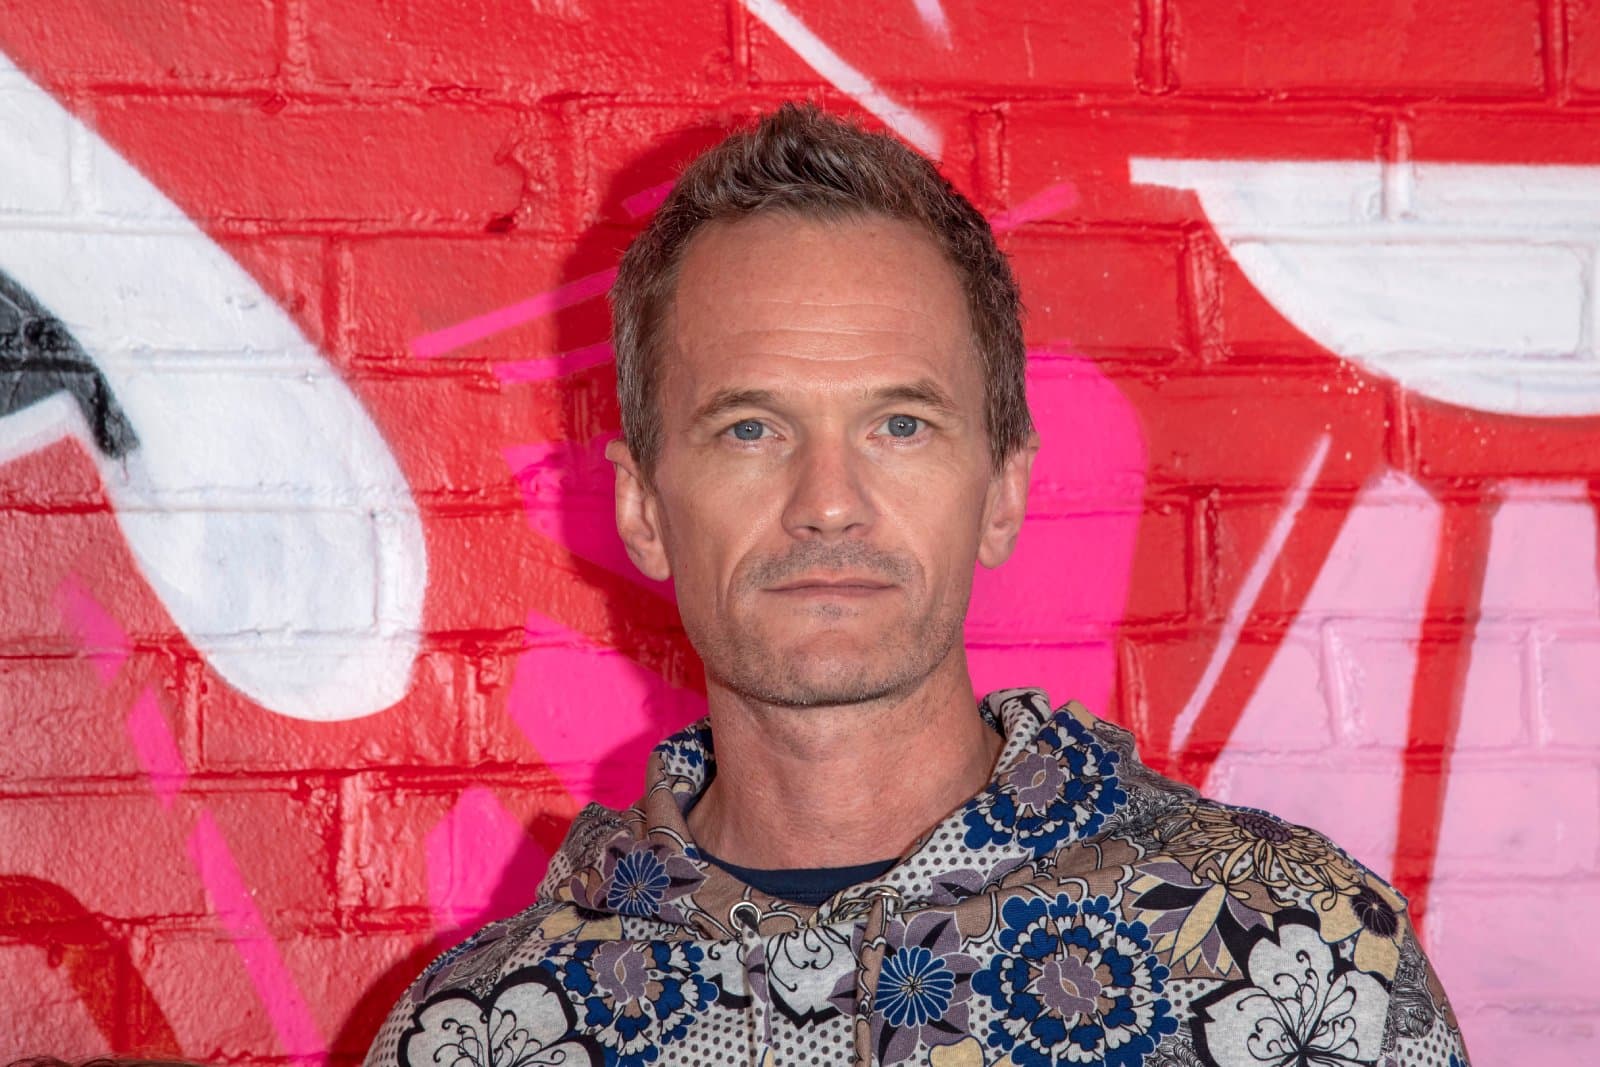 Image Credit: Shutterstock / Ron Adar <p><span>Known for his role as the womanizing Barney Stinson on “How I Met Your Mother,” Neil’s coming out in 2006 was a surprise to many fans.</span></p>